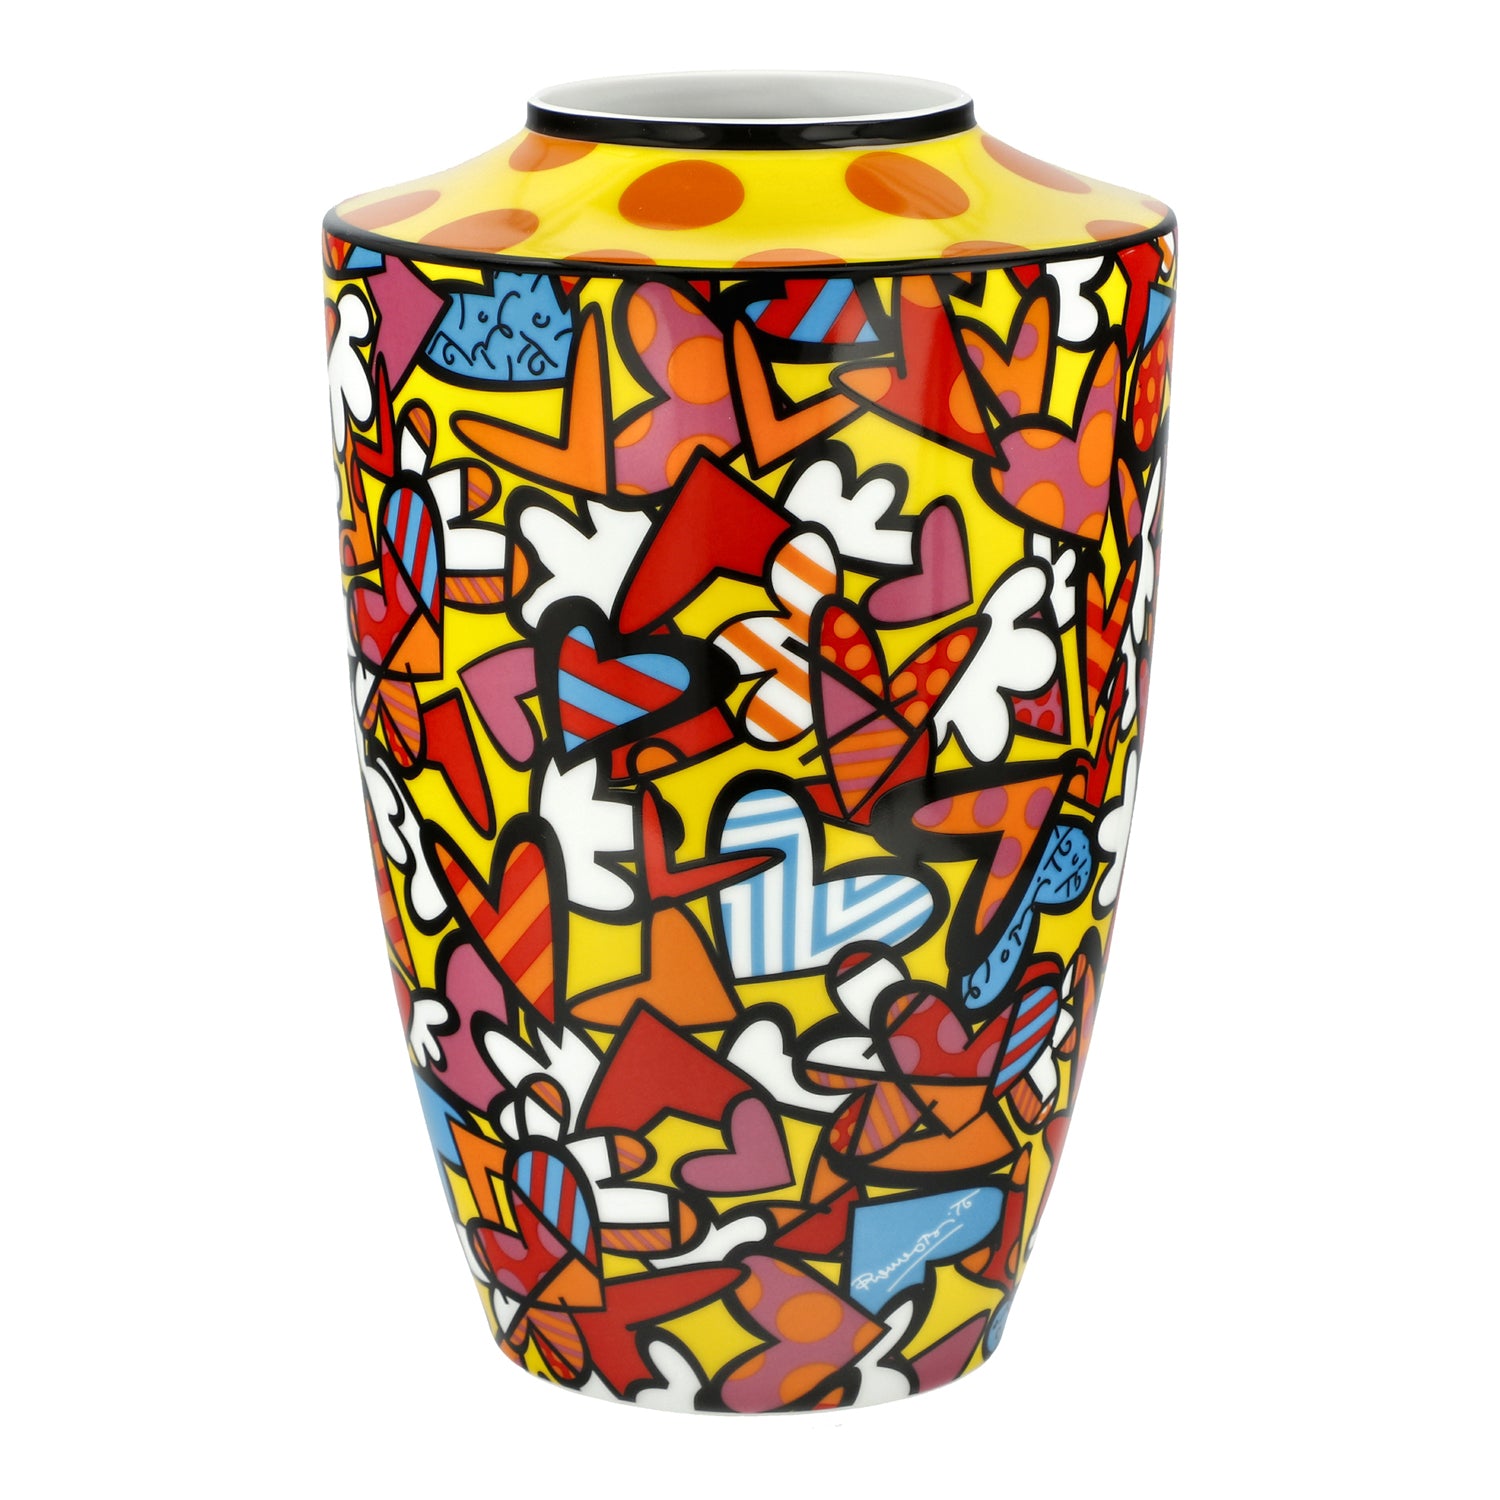 All we need is Love - Vase v. Britto